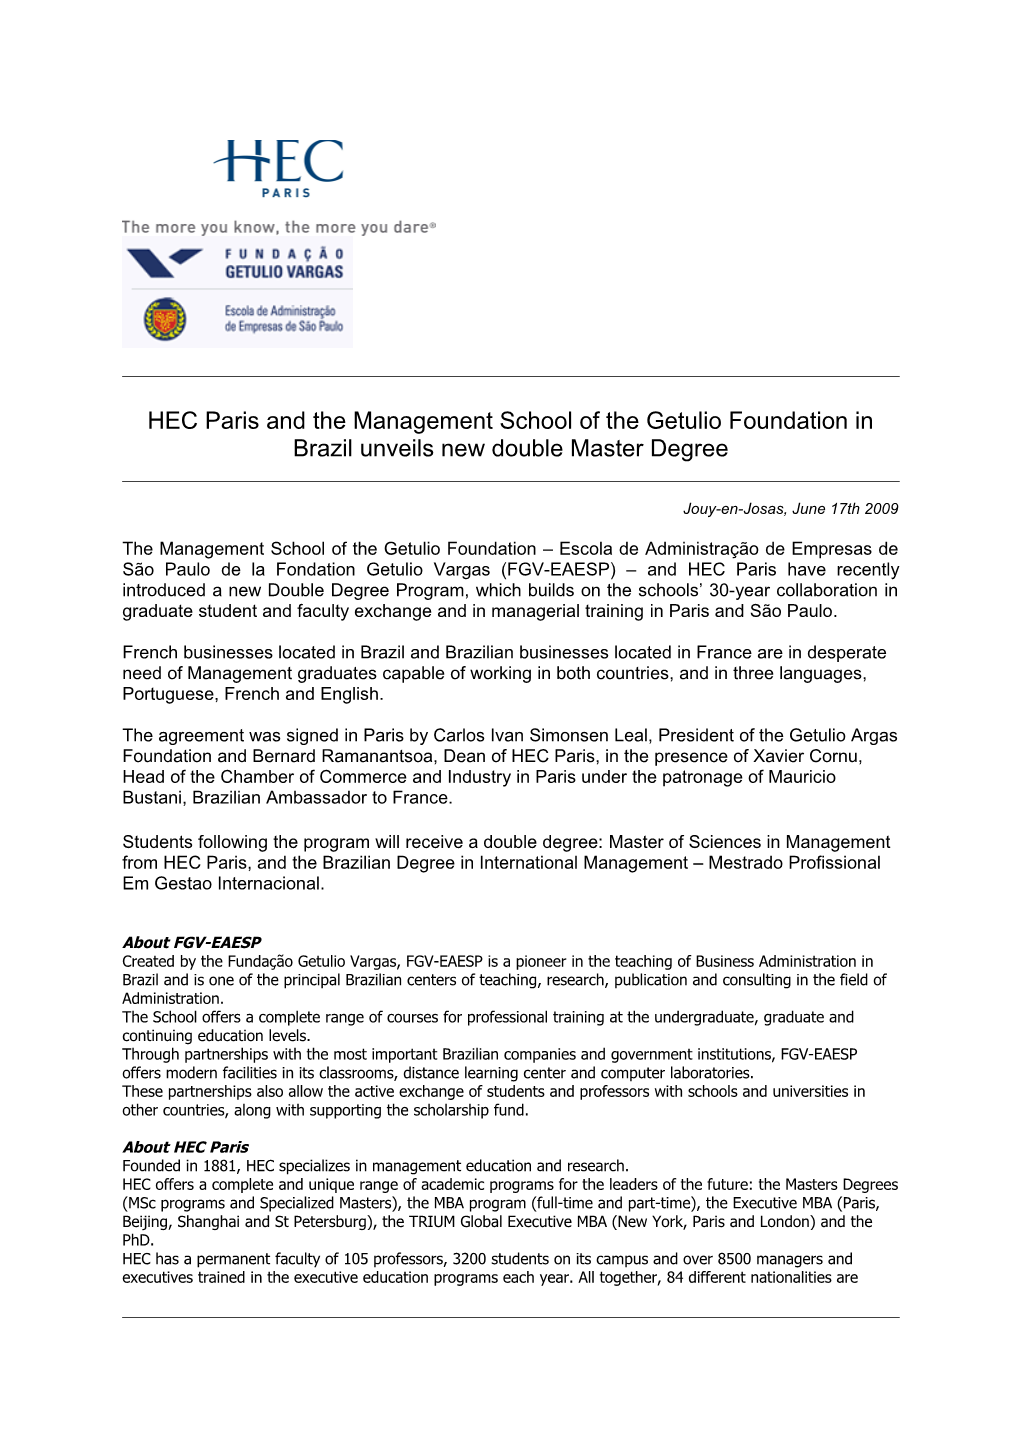 HEC Paris and the Management School of the Getulio Foundation in Brazil Unveils New Double